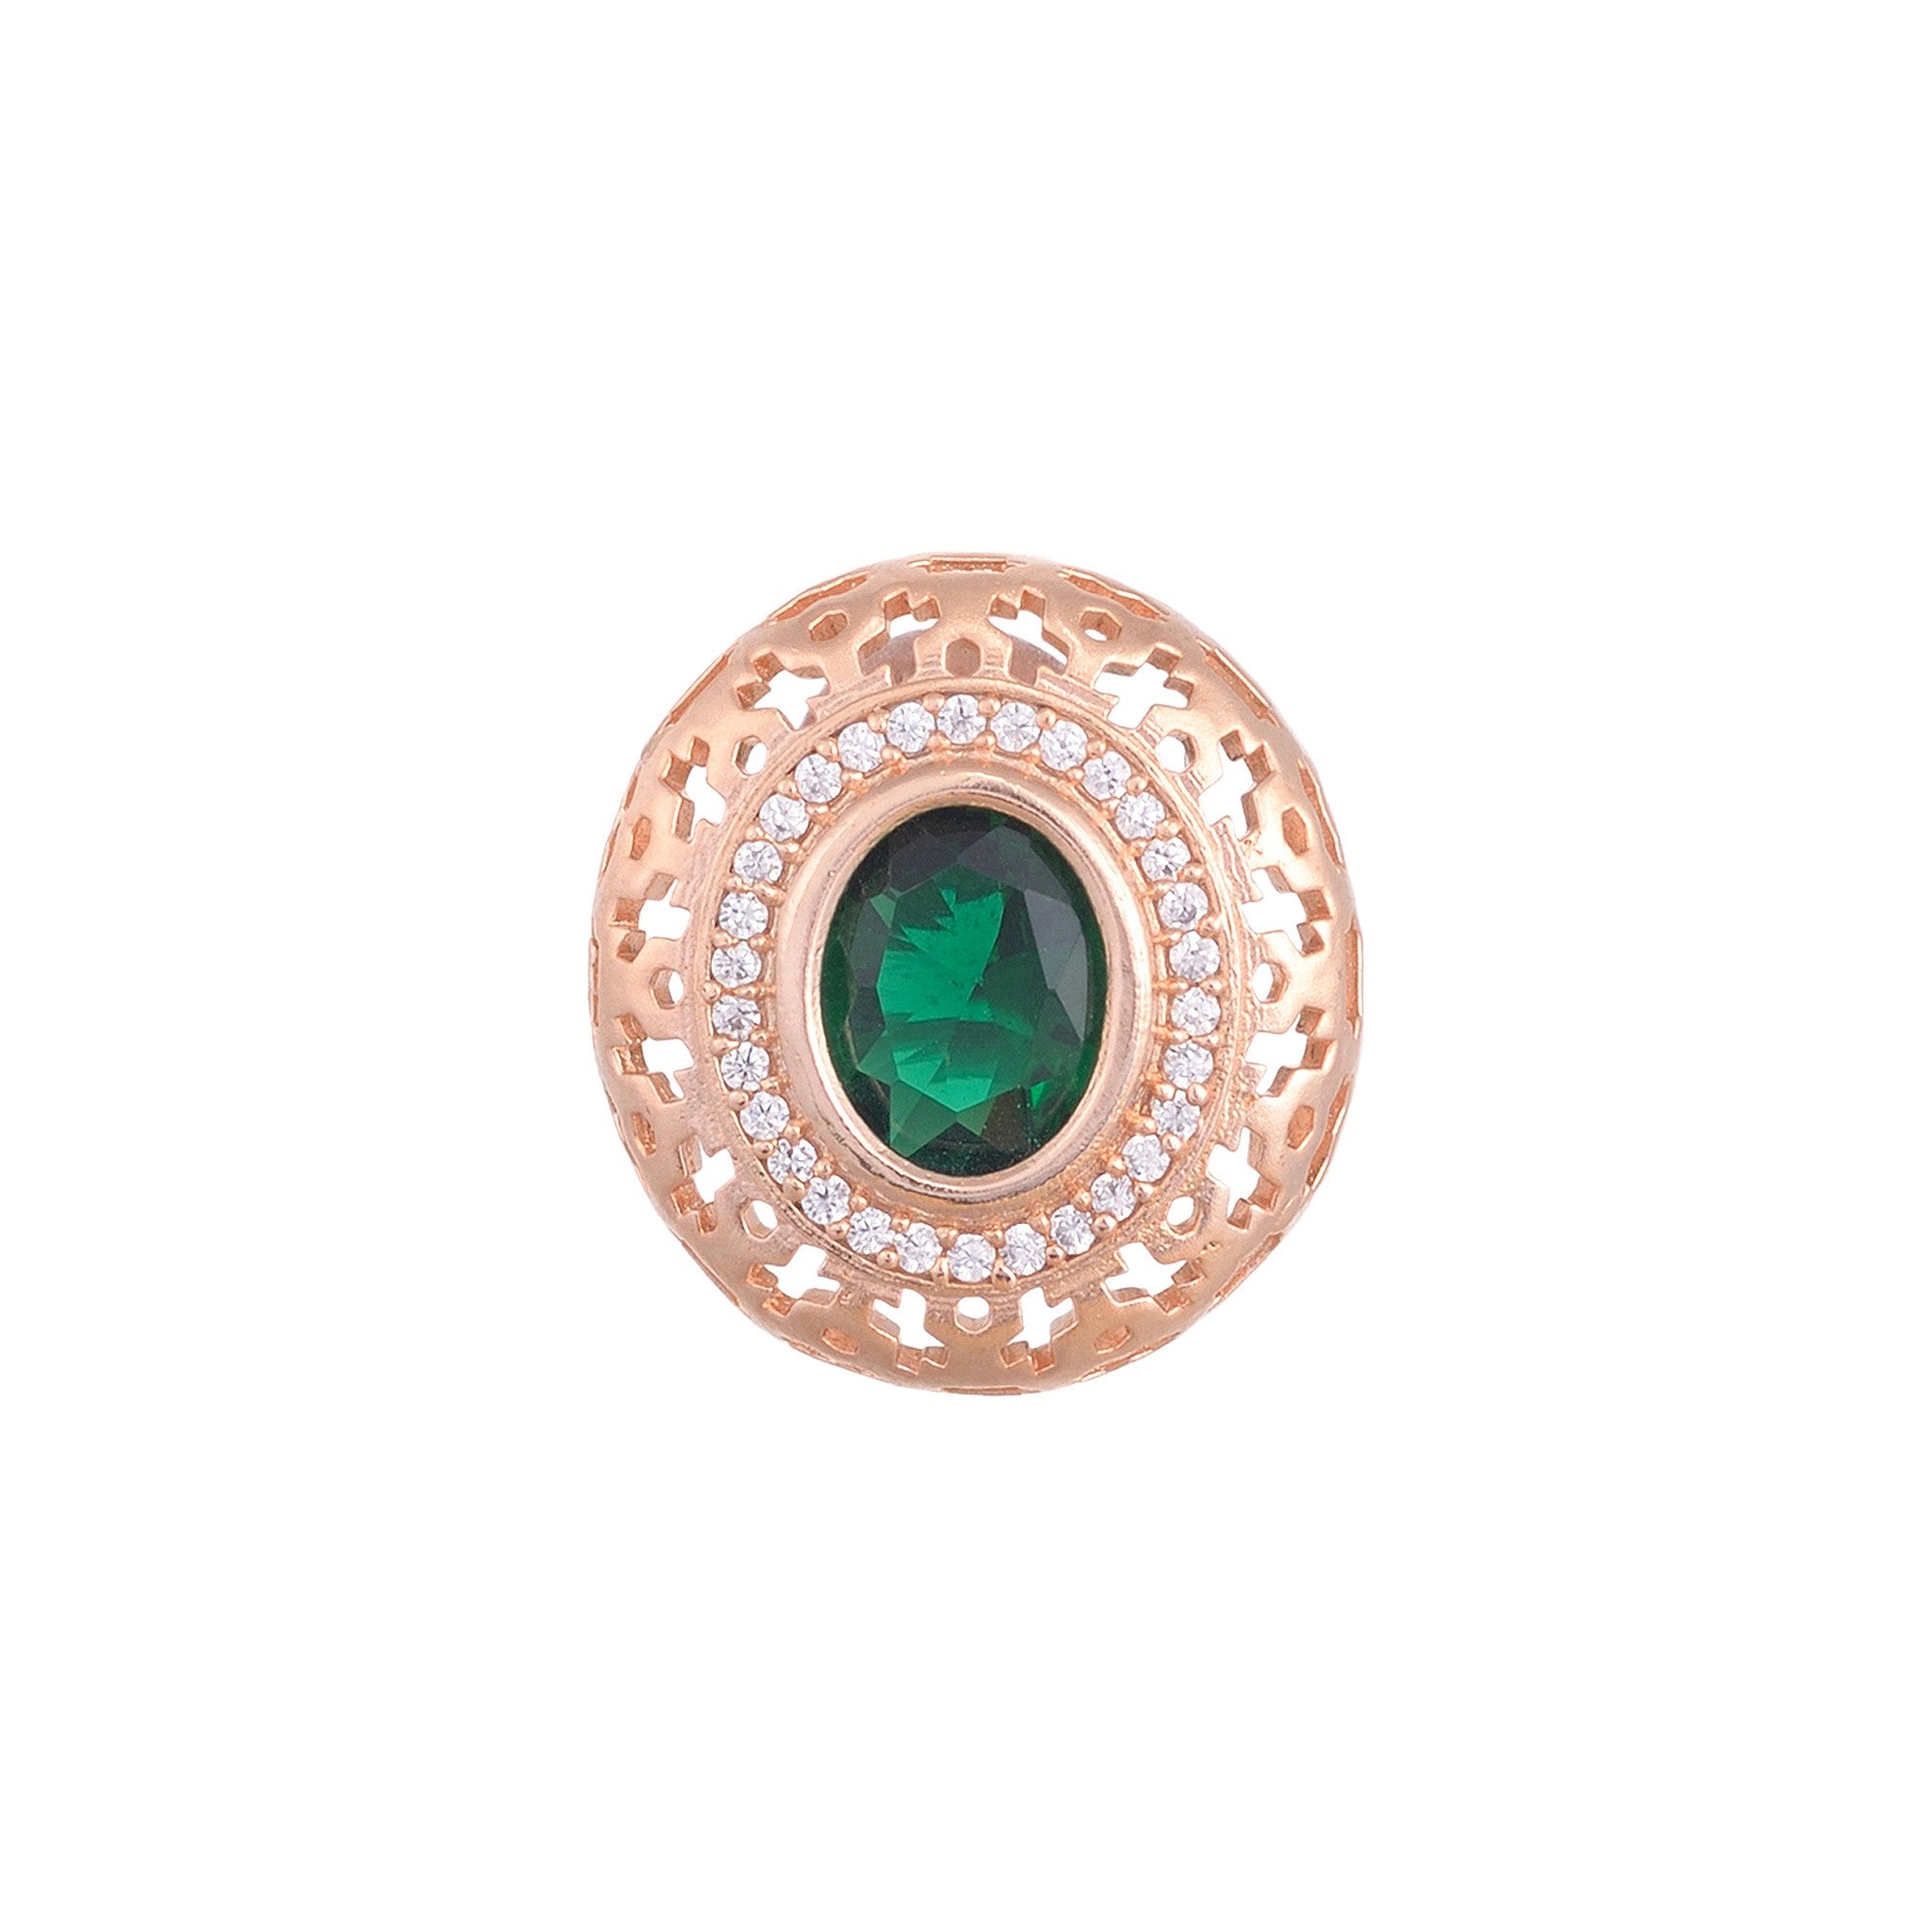 Royal Emerald Studs Rose Gold Plated Ad Handcrafted Tops Green Small Earrings for Women and Girls - Saraf RS Jewellery